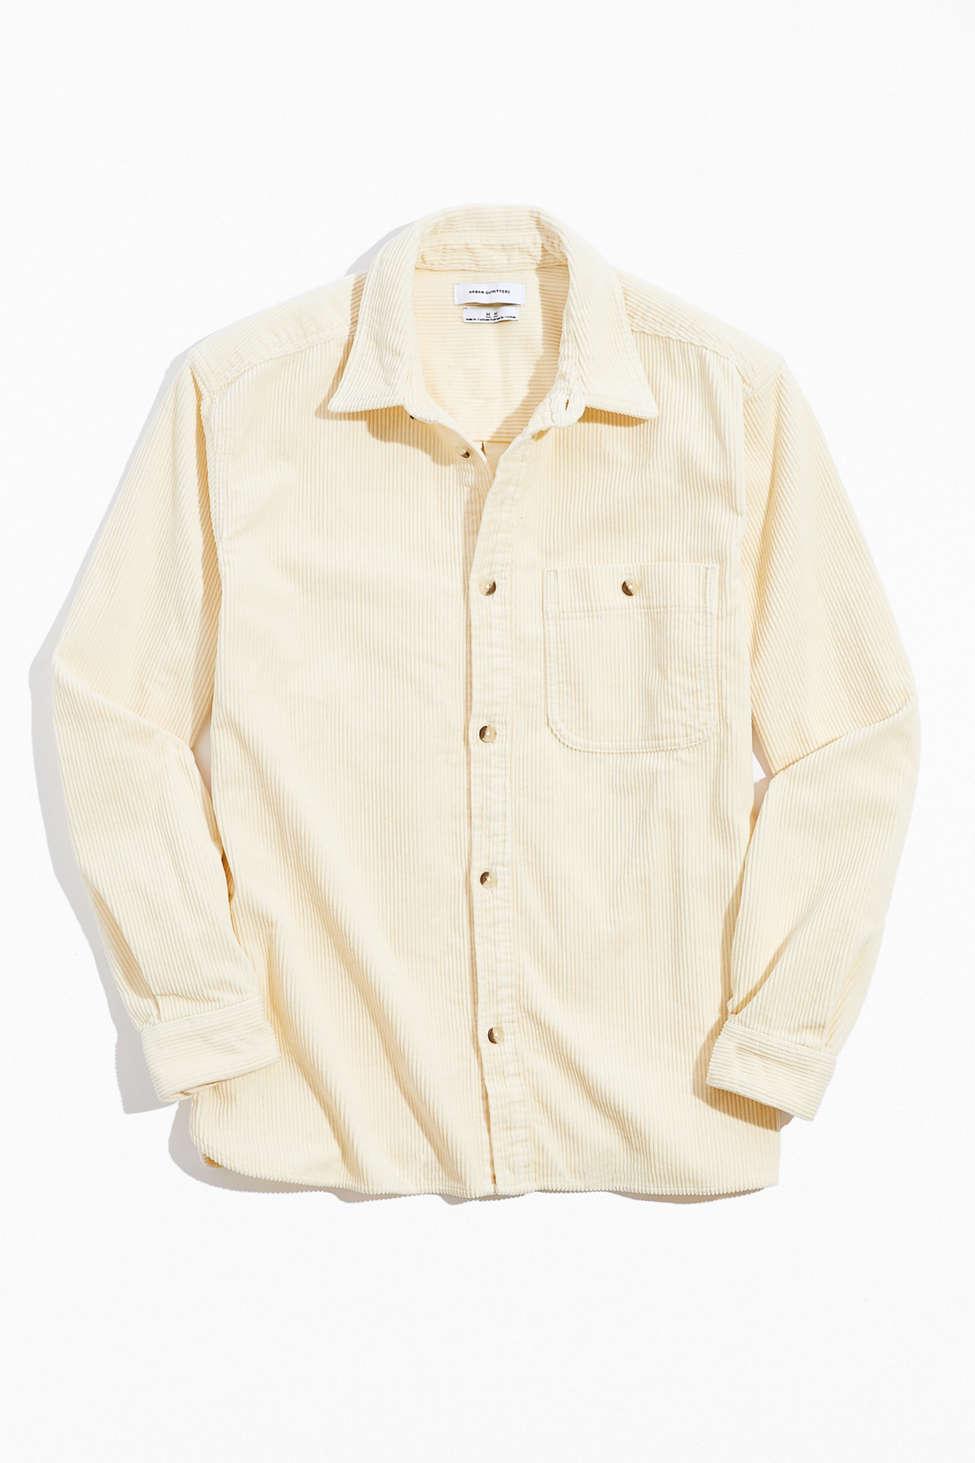 Urban Outfitters Uo Big Corduroy Cotton Work Shirt in Ivory 